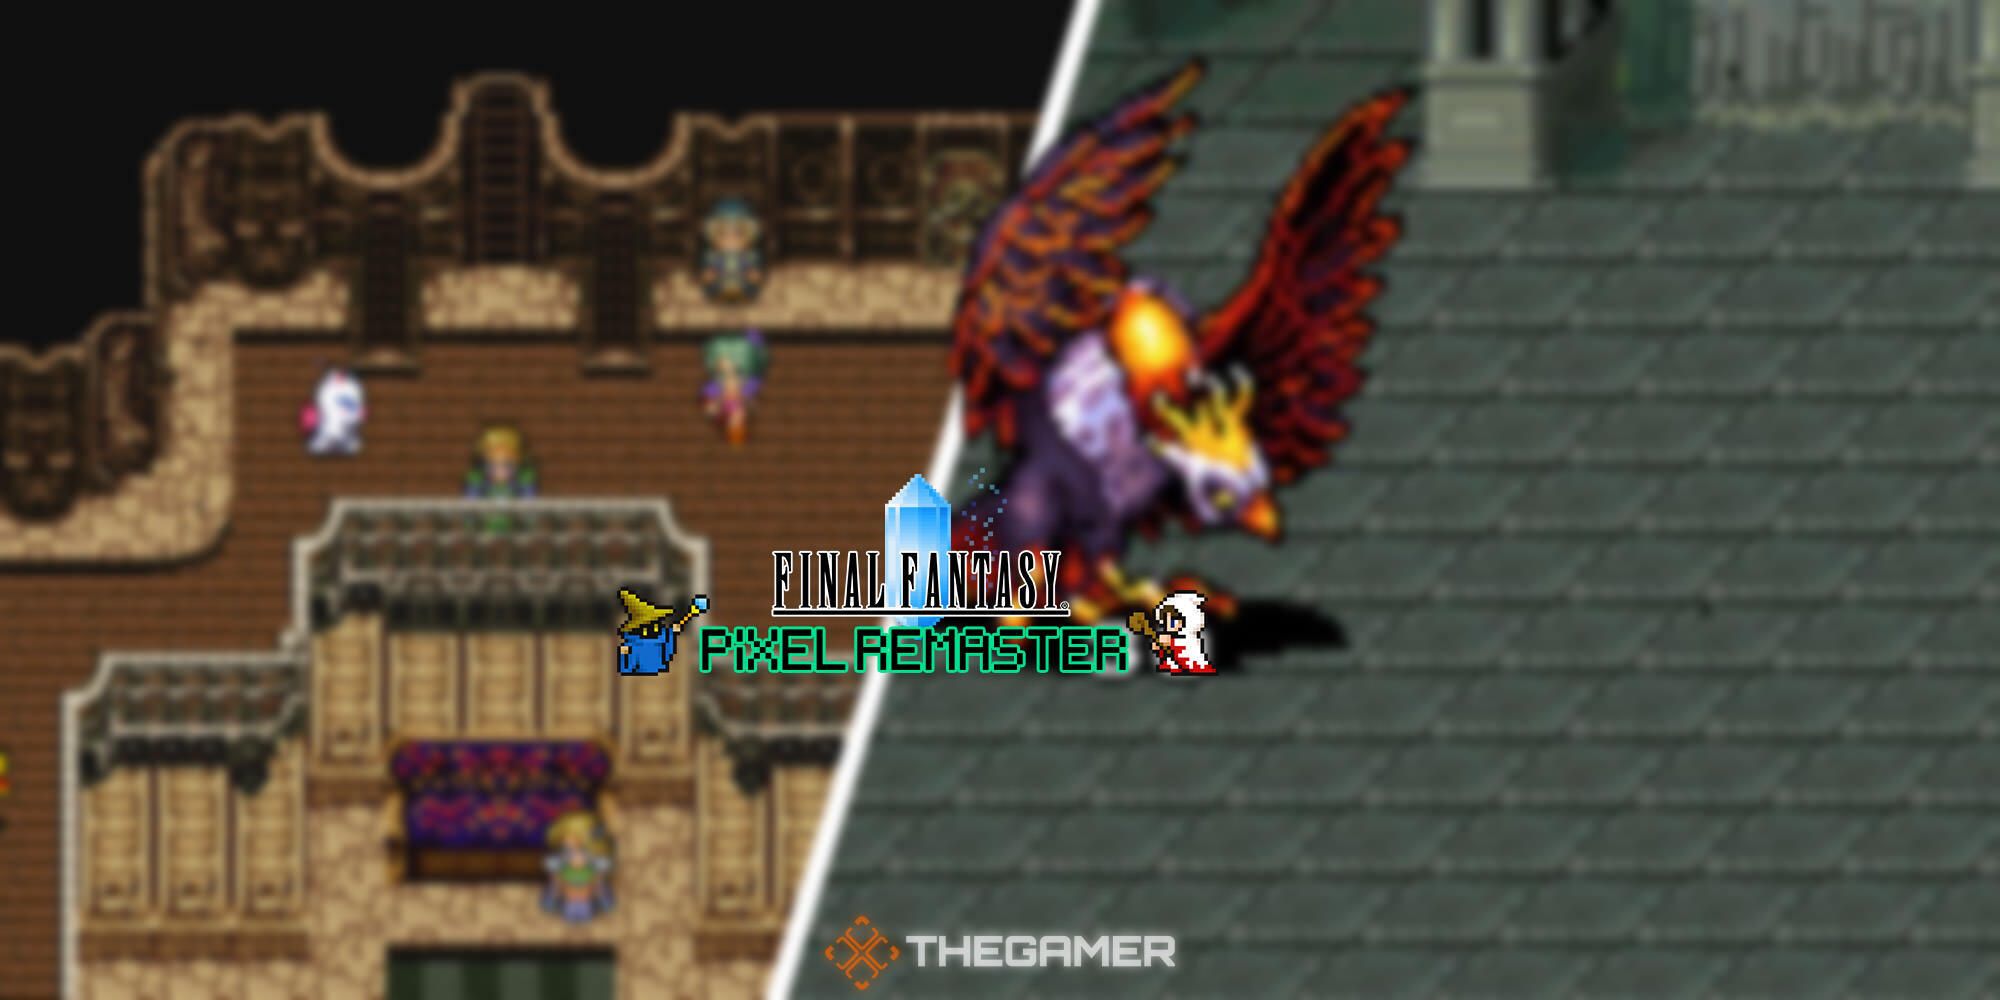 Final Fantasy 6 Pixel Remaster, two pictures, hub area for left picture, and big bird fight for right picture